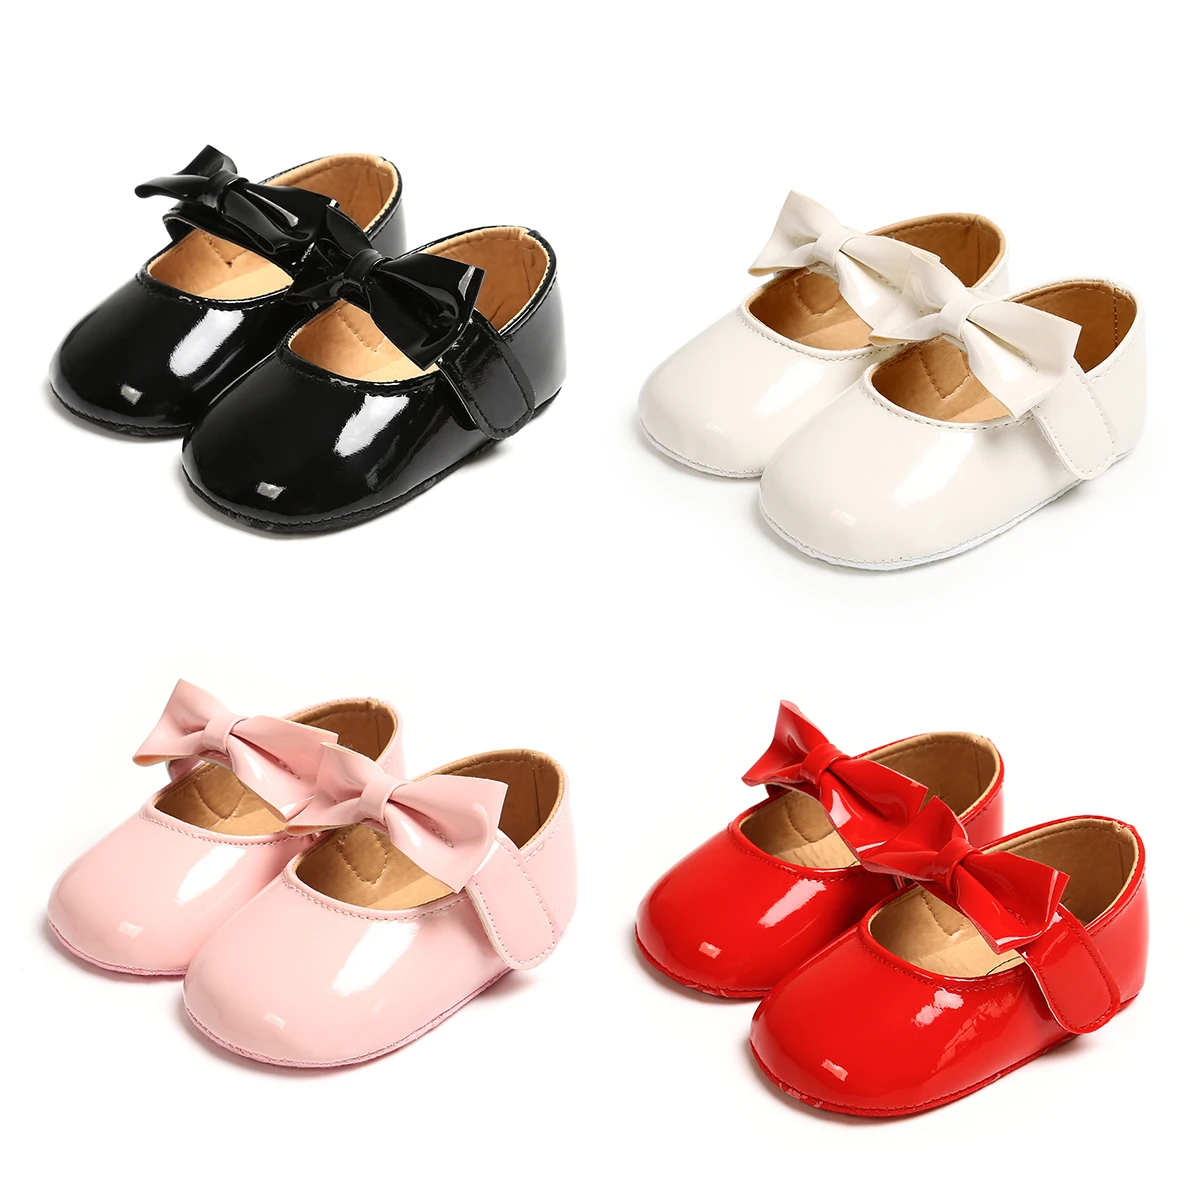 

New arrived PU Leather Bowknot Party ballet princess dress baby girl shoes, 4 colors